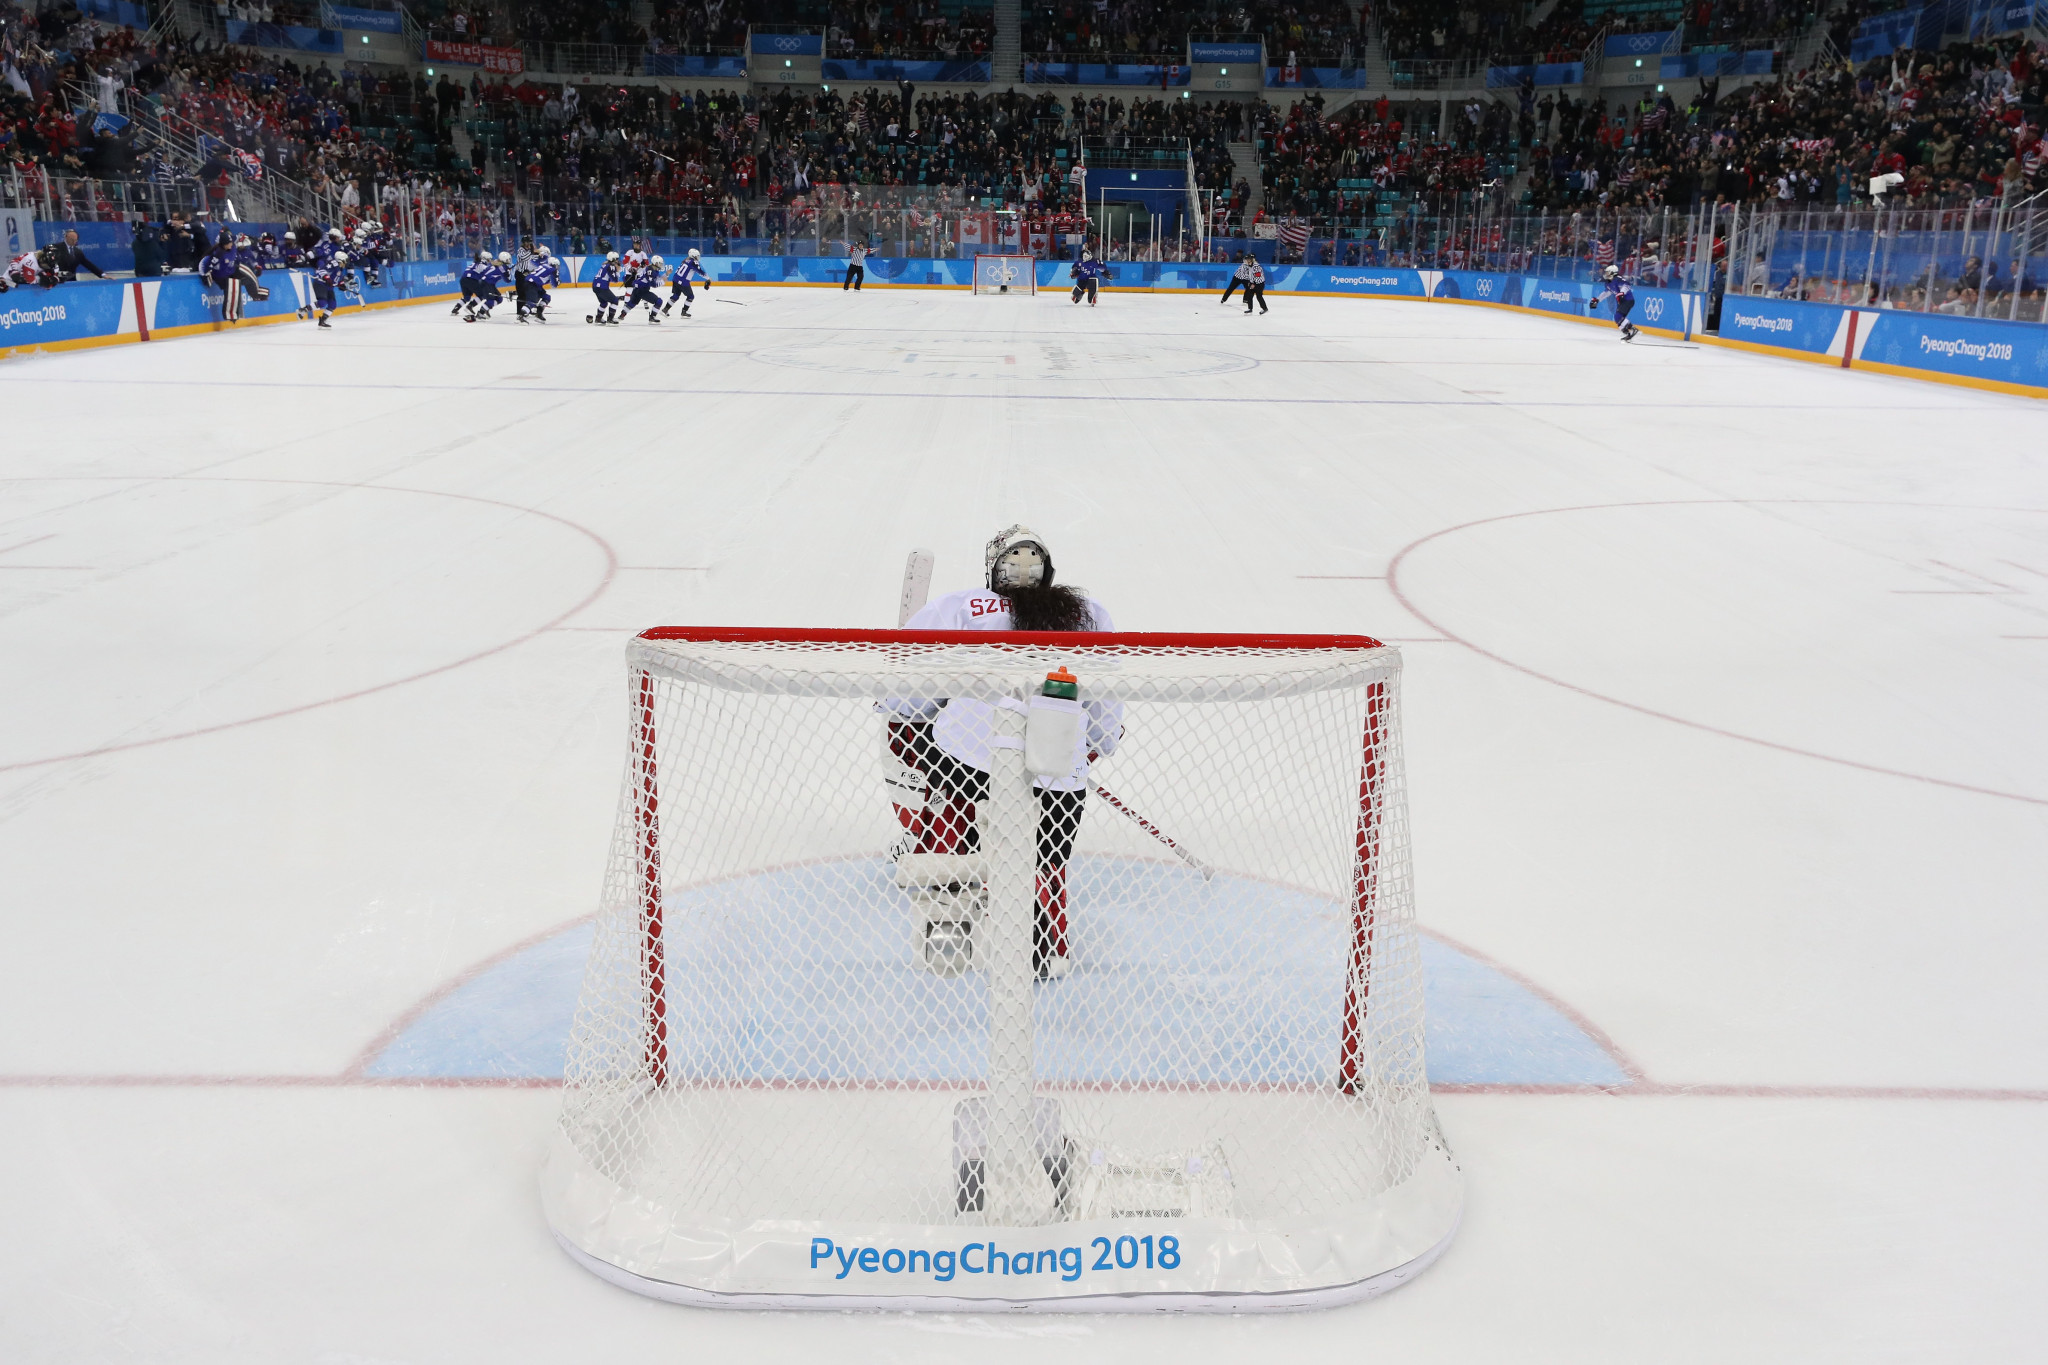 Ice hockey features at the Winter Olympic Games, while the three-on-three format featured at the Youth Olympics in Lausanne in 2020 ©Getty Images